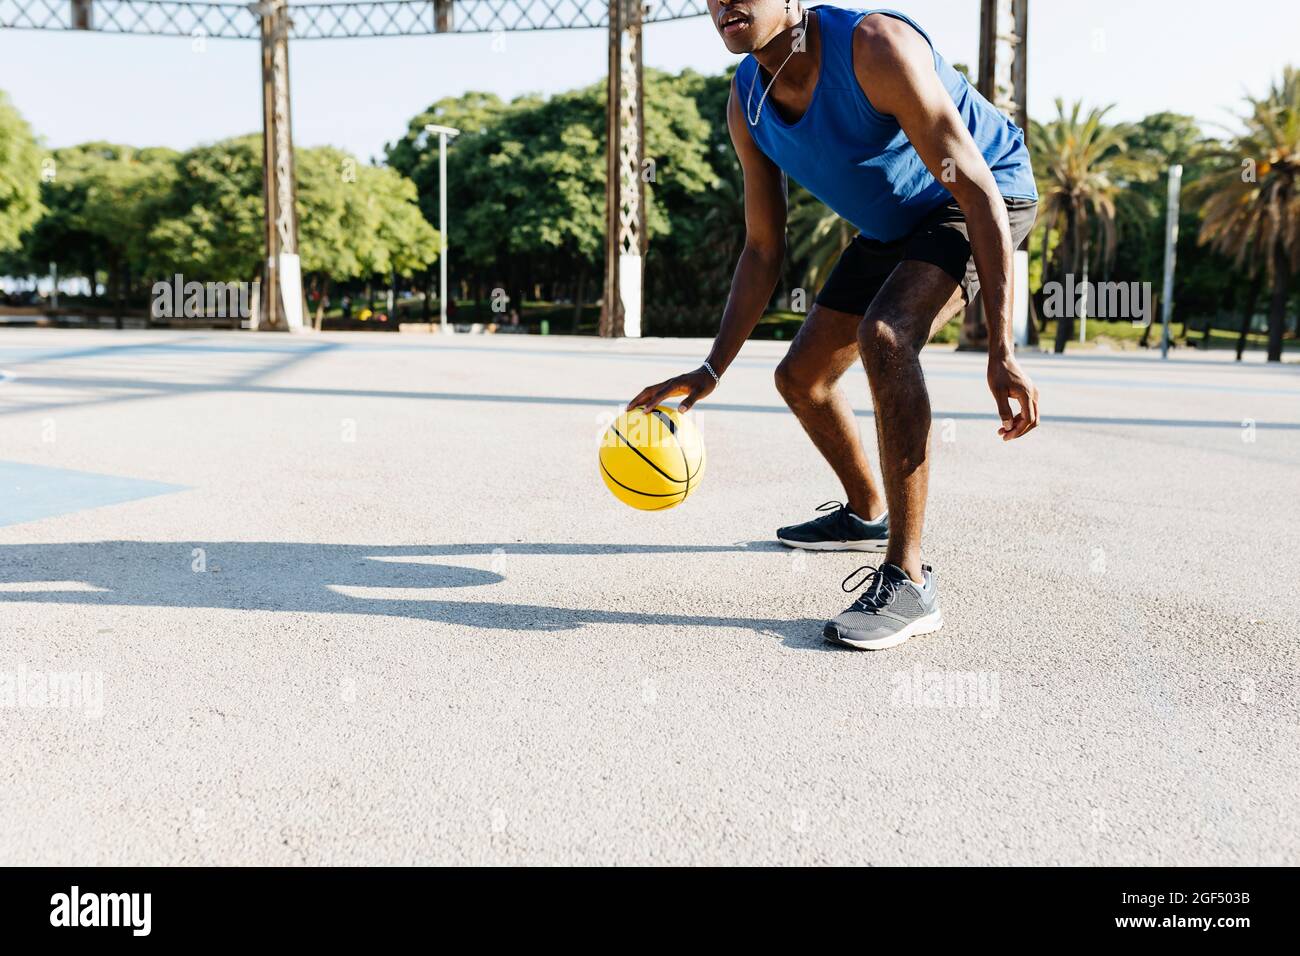 Male basketball player playing at sports court Stock Photo